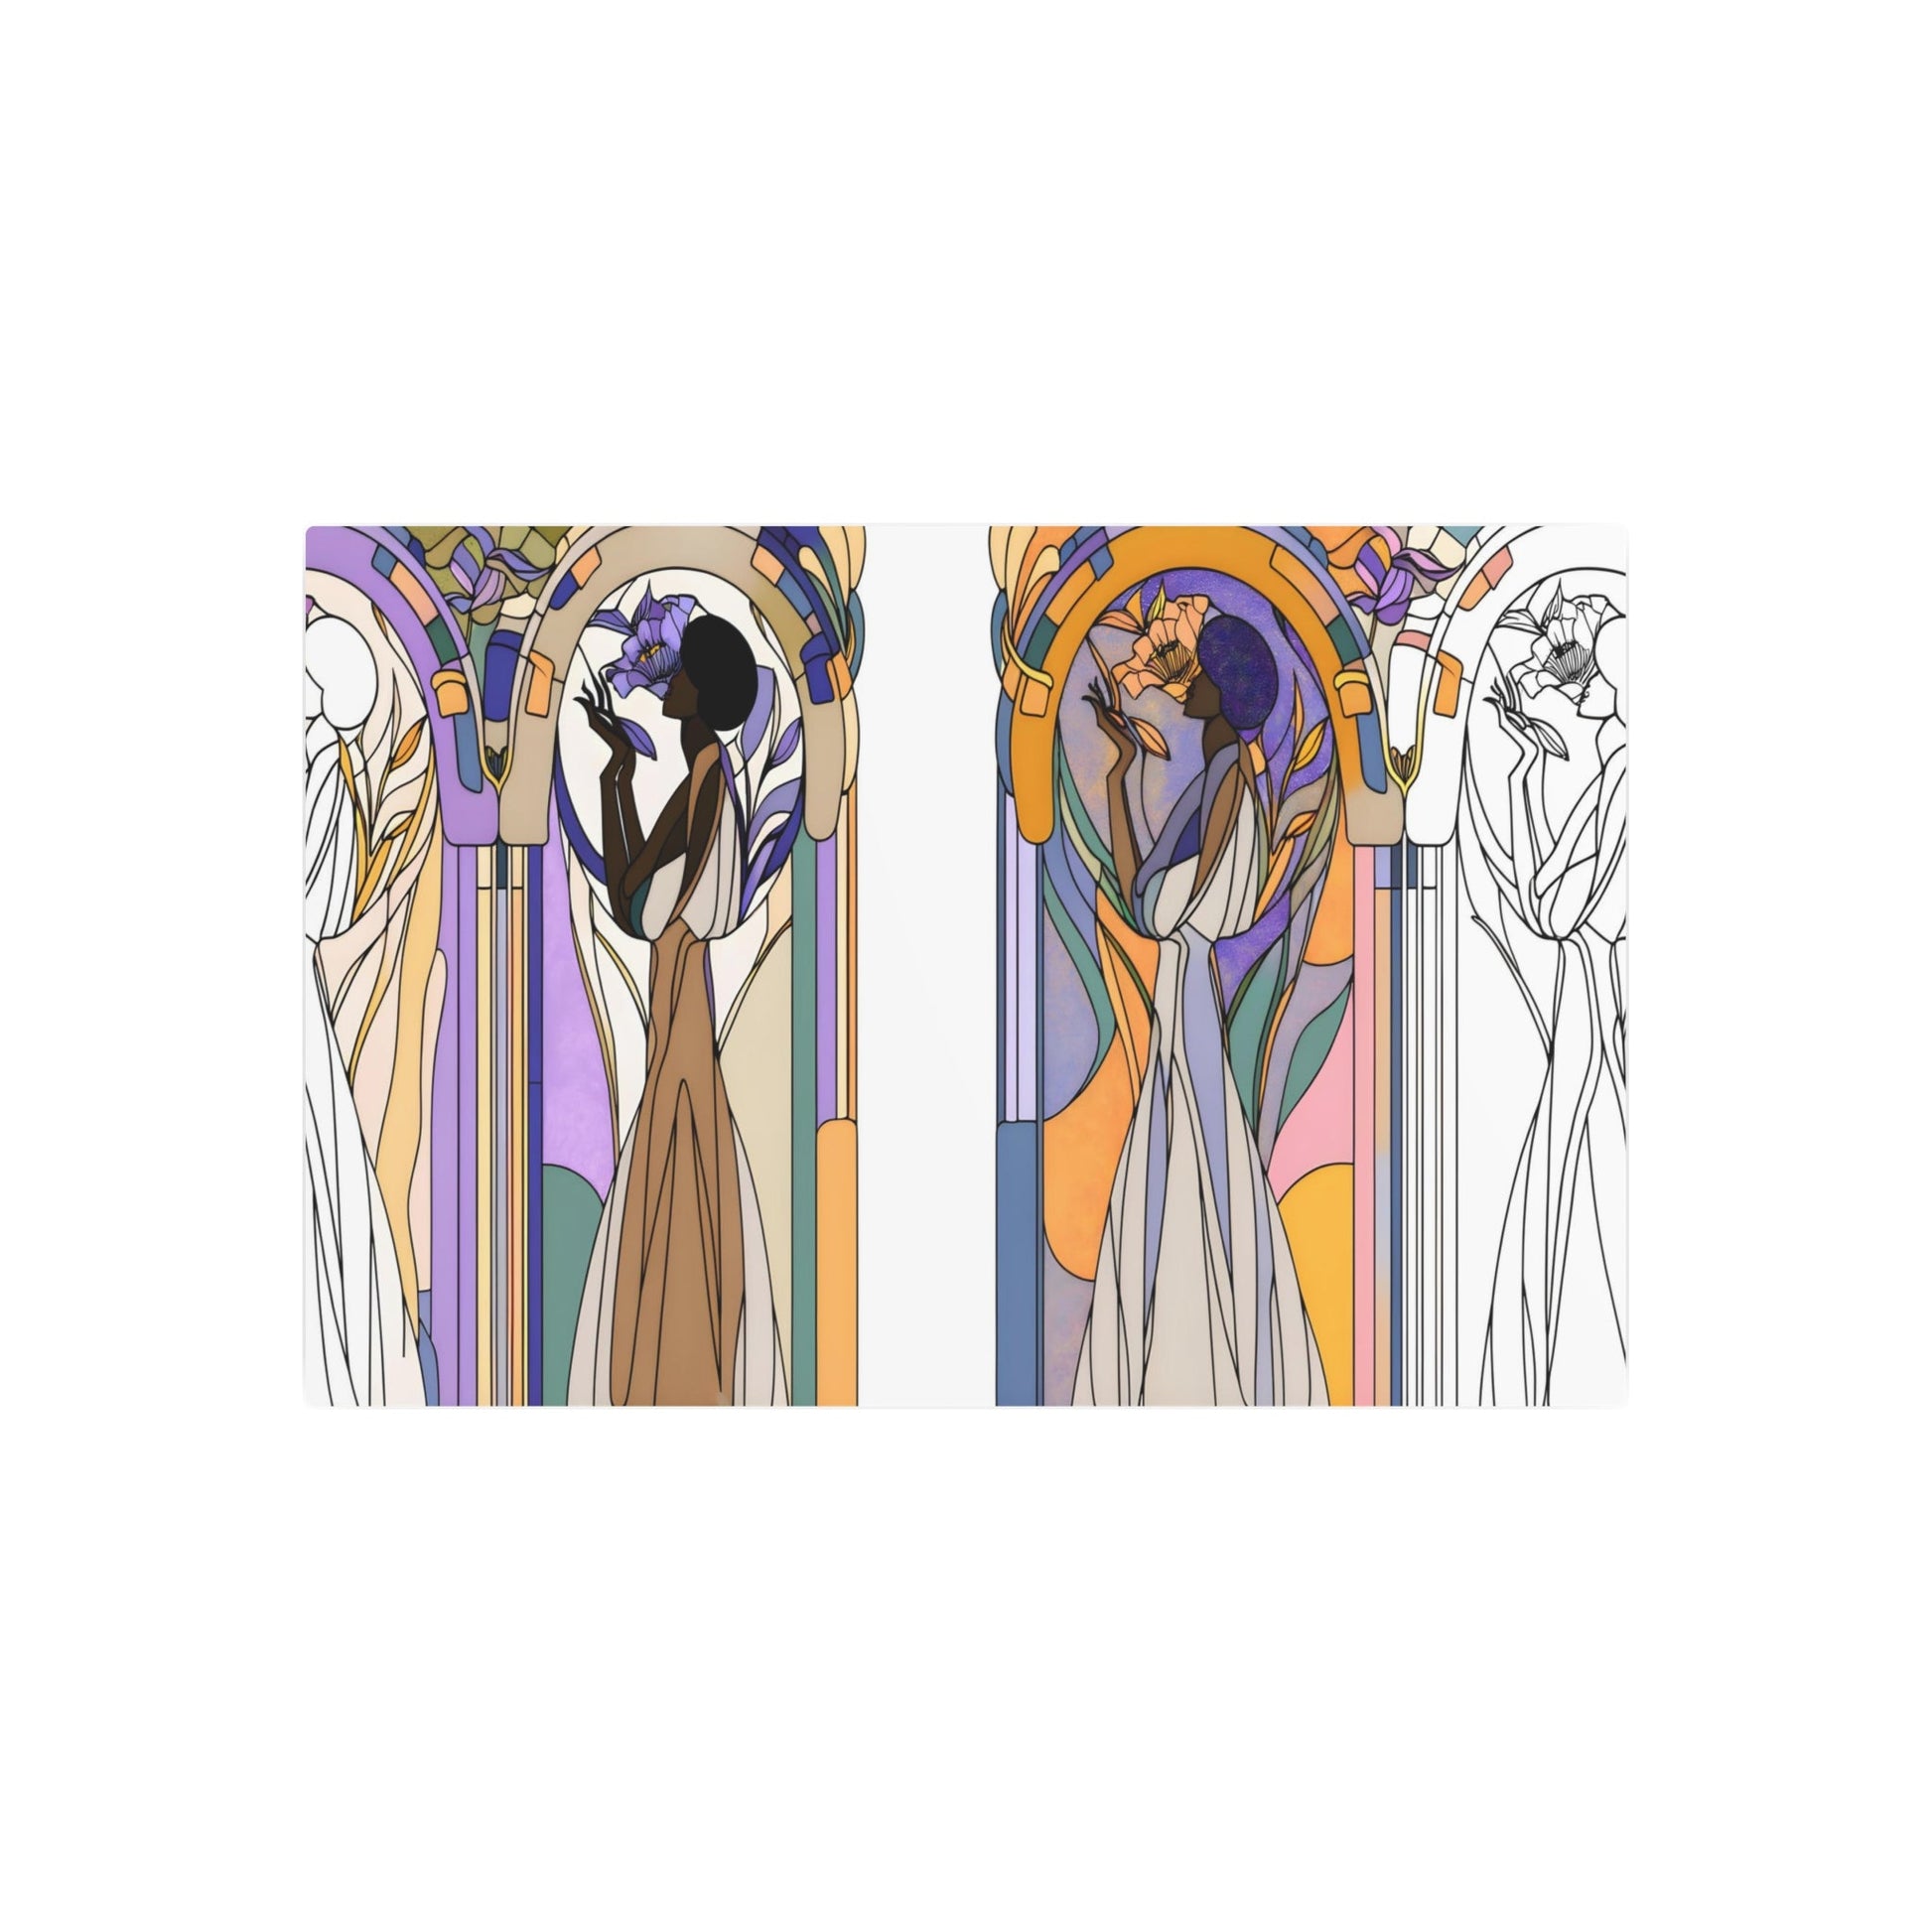 Metal Poster Art | "Art Nouveau Pastel Floral Masterpiece with Organic Geometry and Graceful Woman - Western Art Styles Collection" - Metal Poster Art 36″ x 24″ (Horizontal) 0.12''